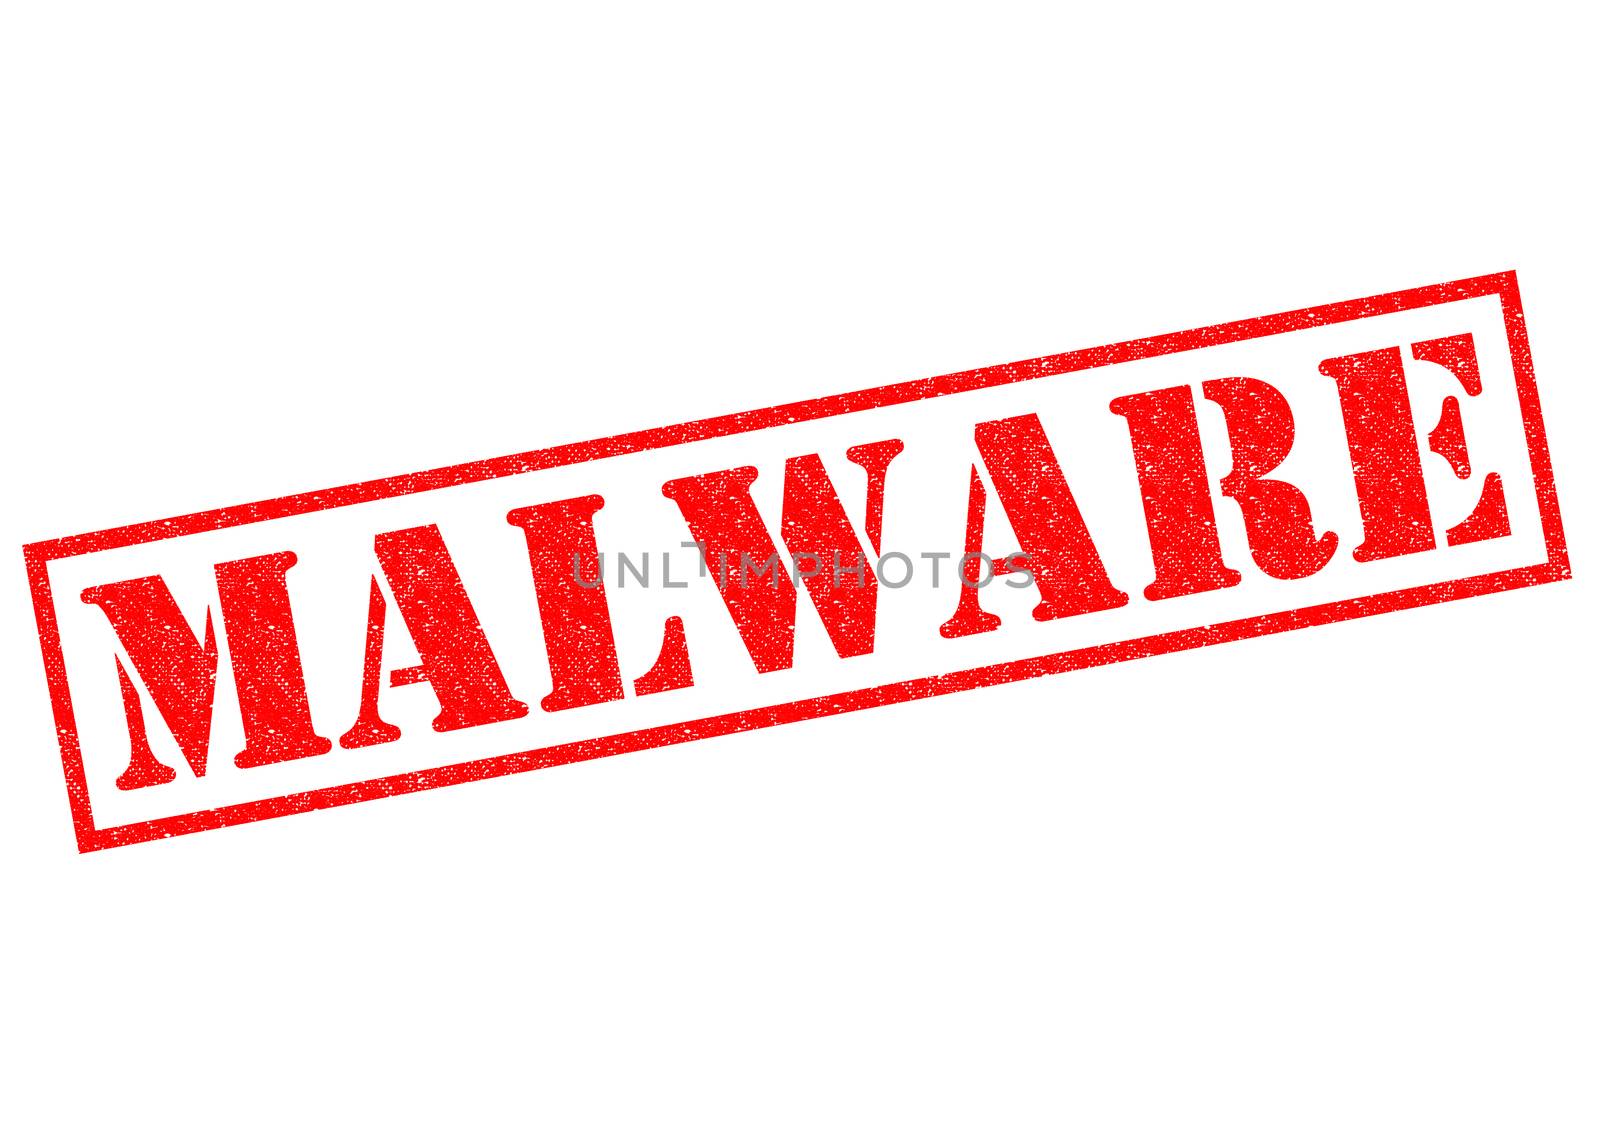 MALWARE red Rubber Stamp over a white background.